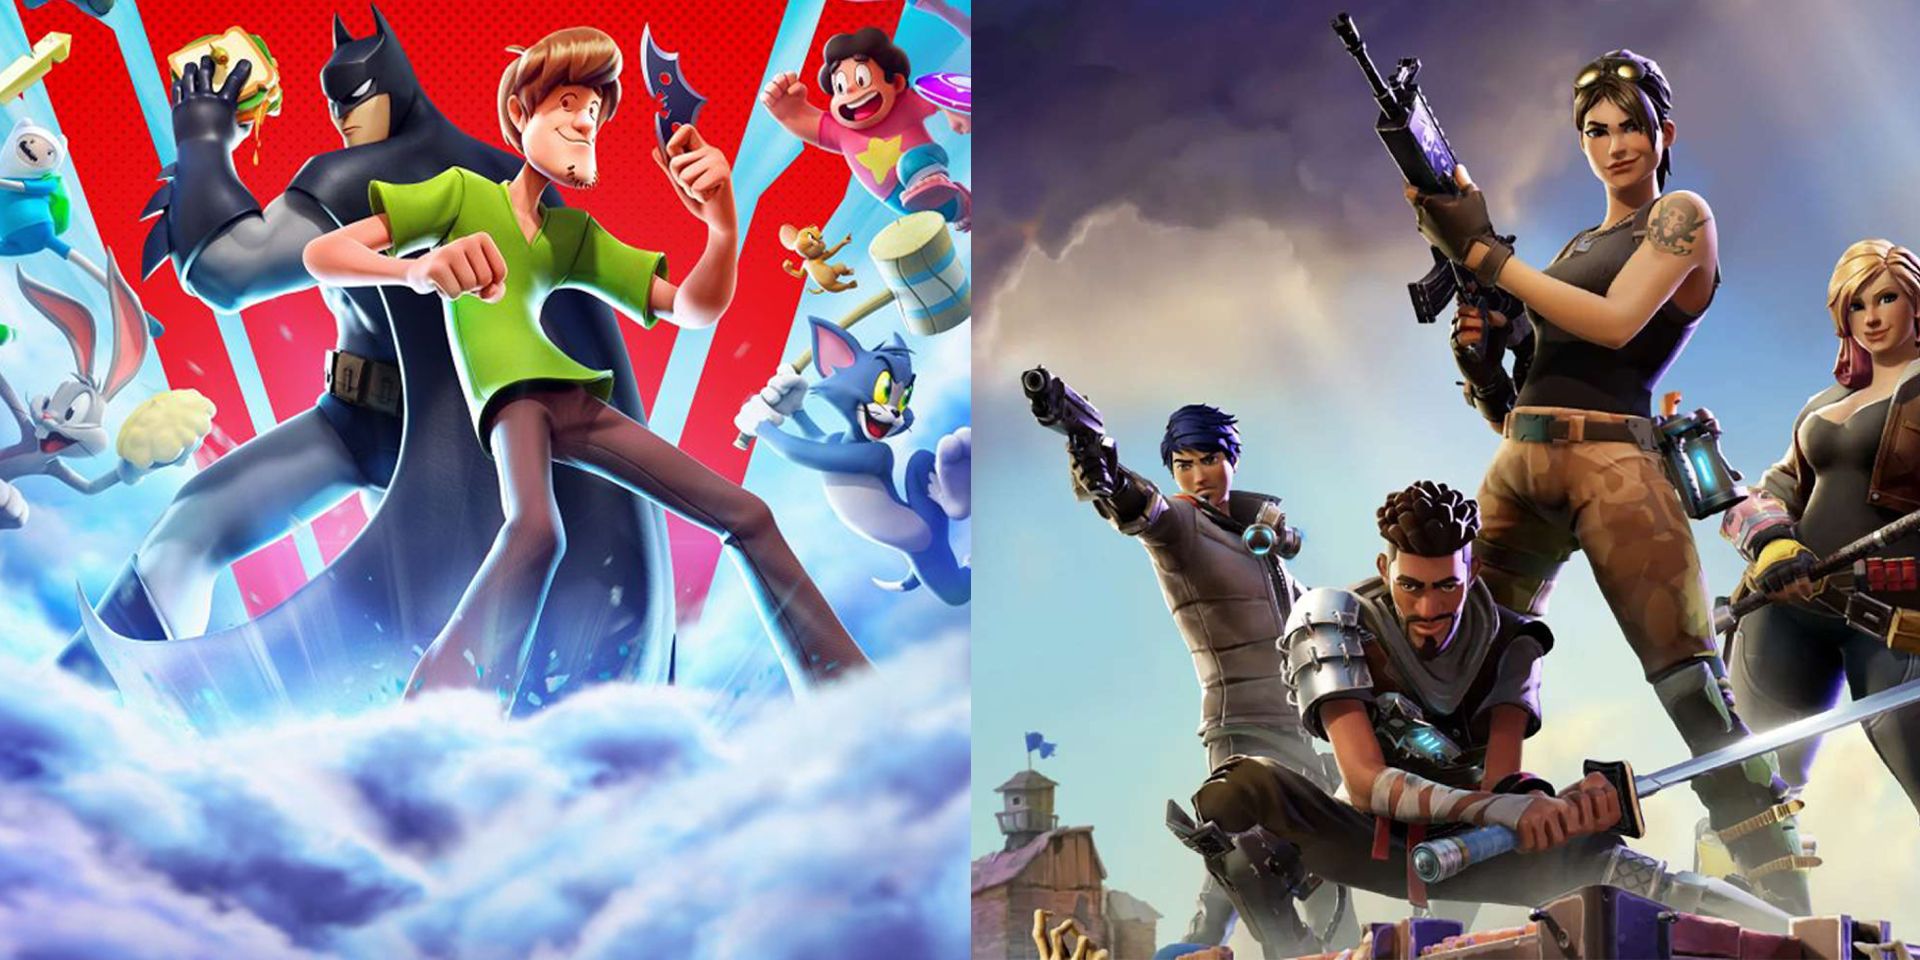 A split image of promo art for MultiVersus and for Fortnite